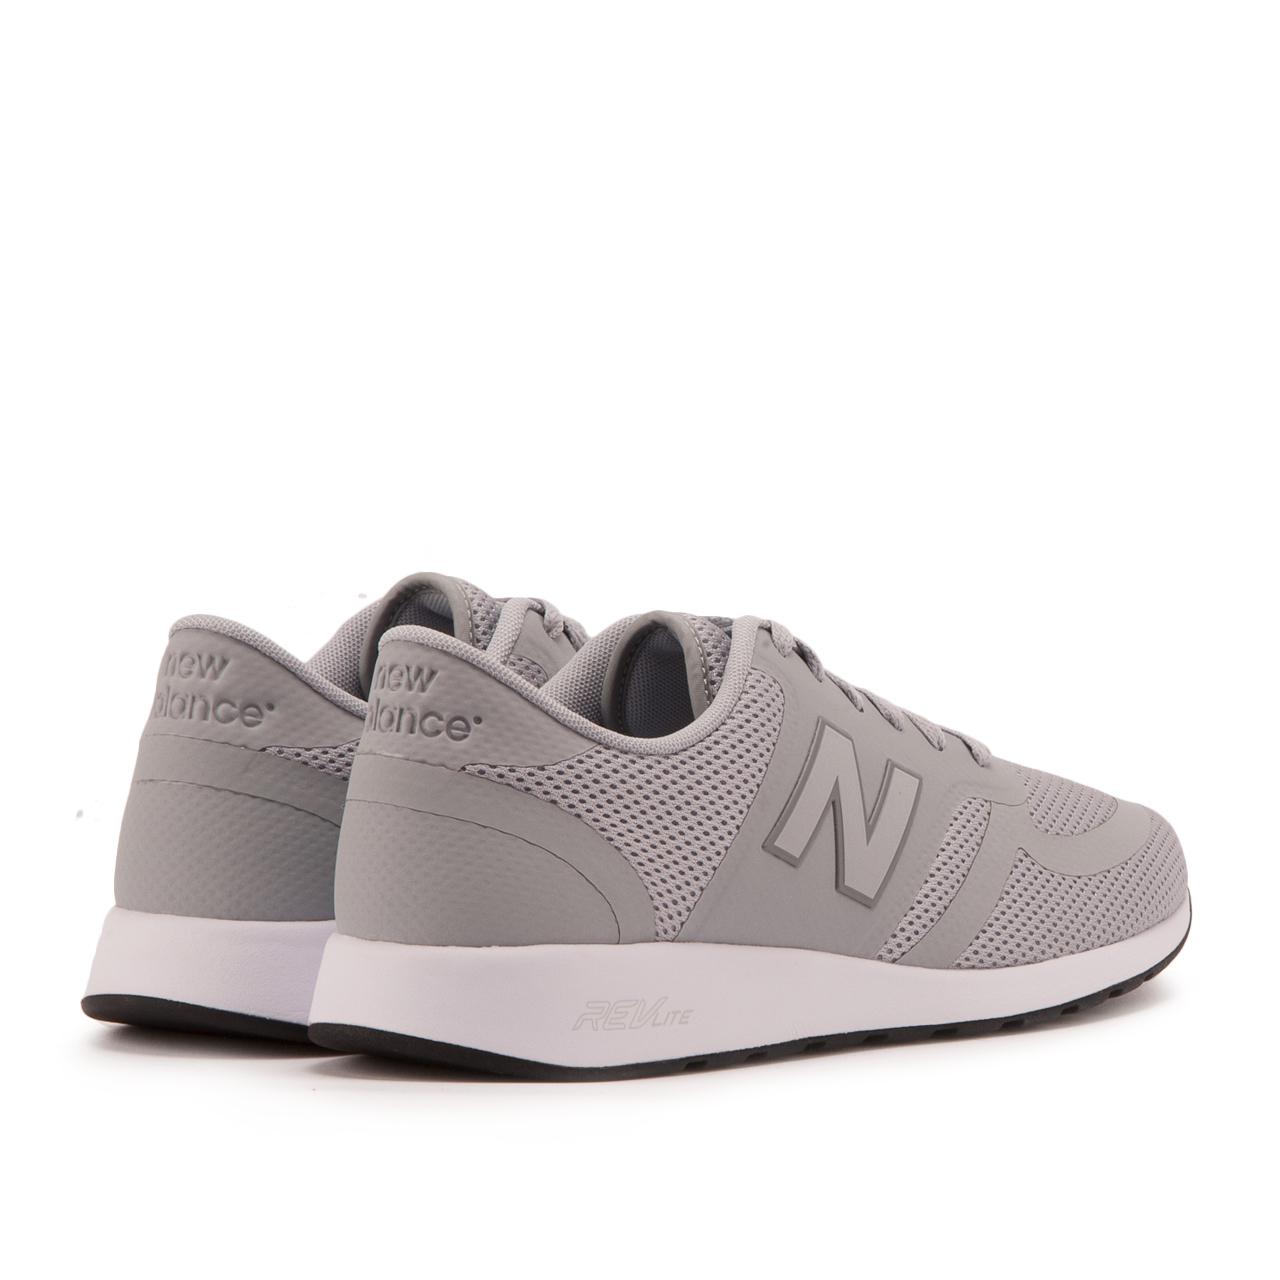 New Balance Mrl420 Trainers Clearance Deals, 53% OFF | irradia.com.es